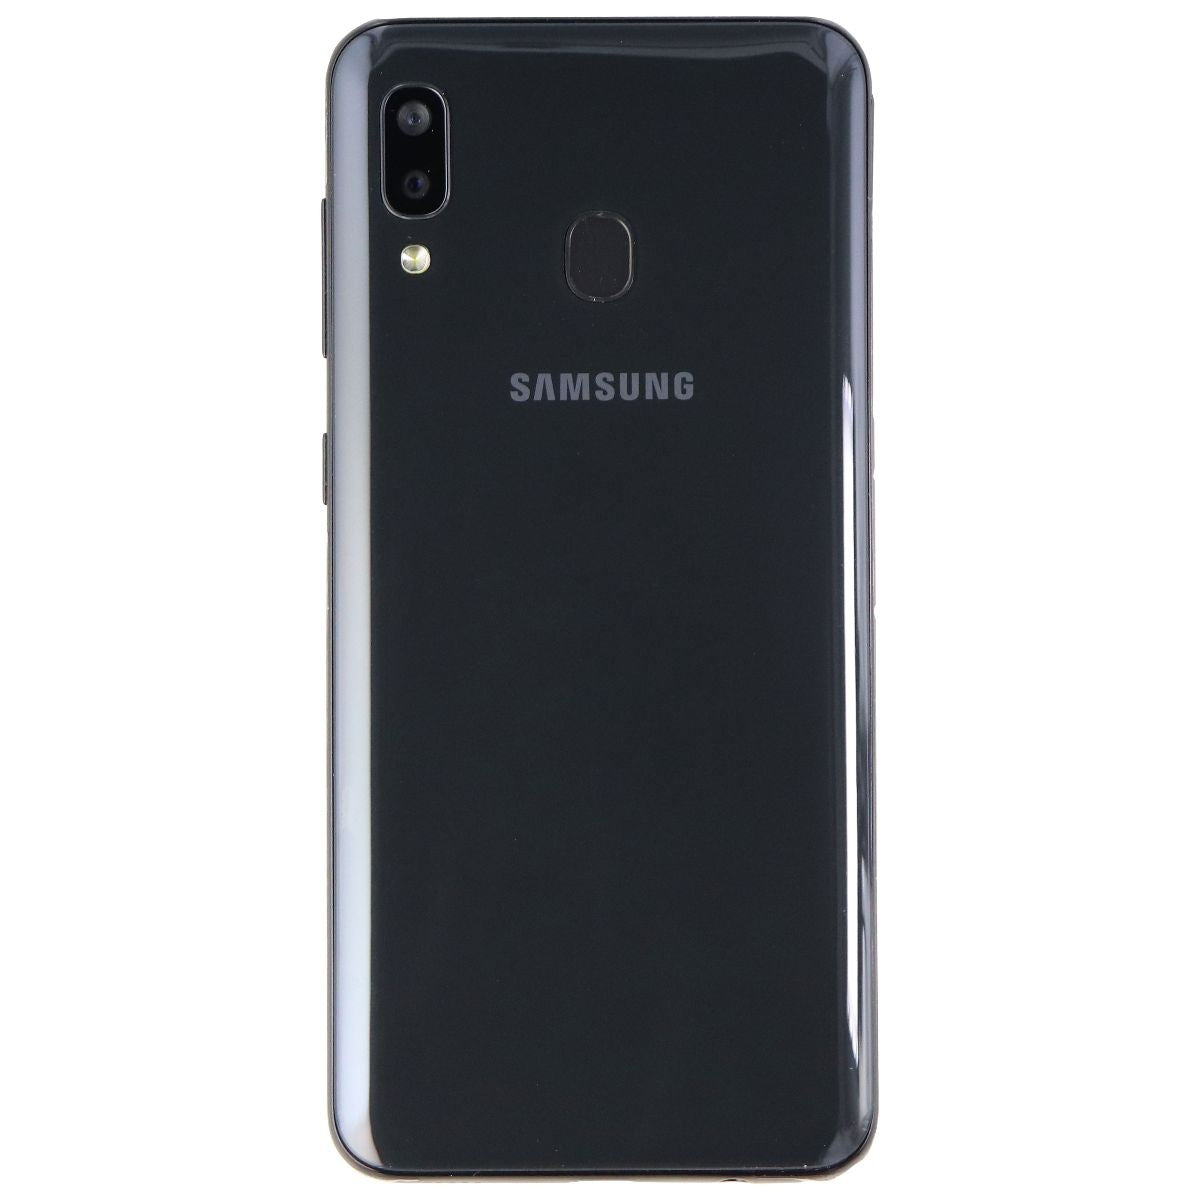 Samsung Galaxy A20 Smartphone (SM-A205) Verizon Only - 32GB / Black Cell Phones & Smartphones Samsung    - Simple Cell Bulk Wholesale Pricing - USA Seller